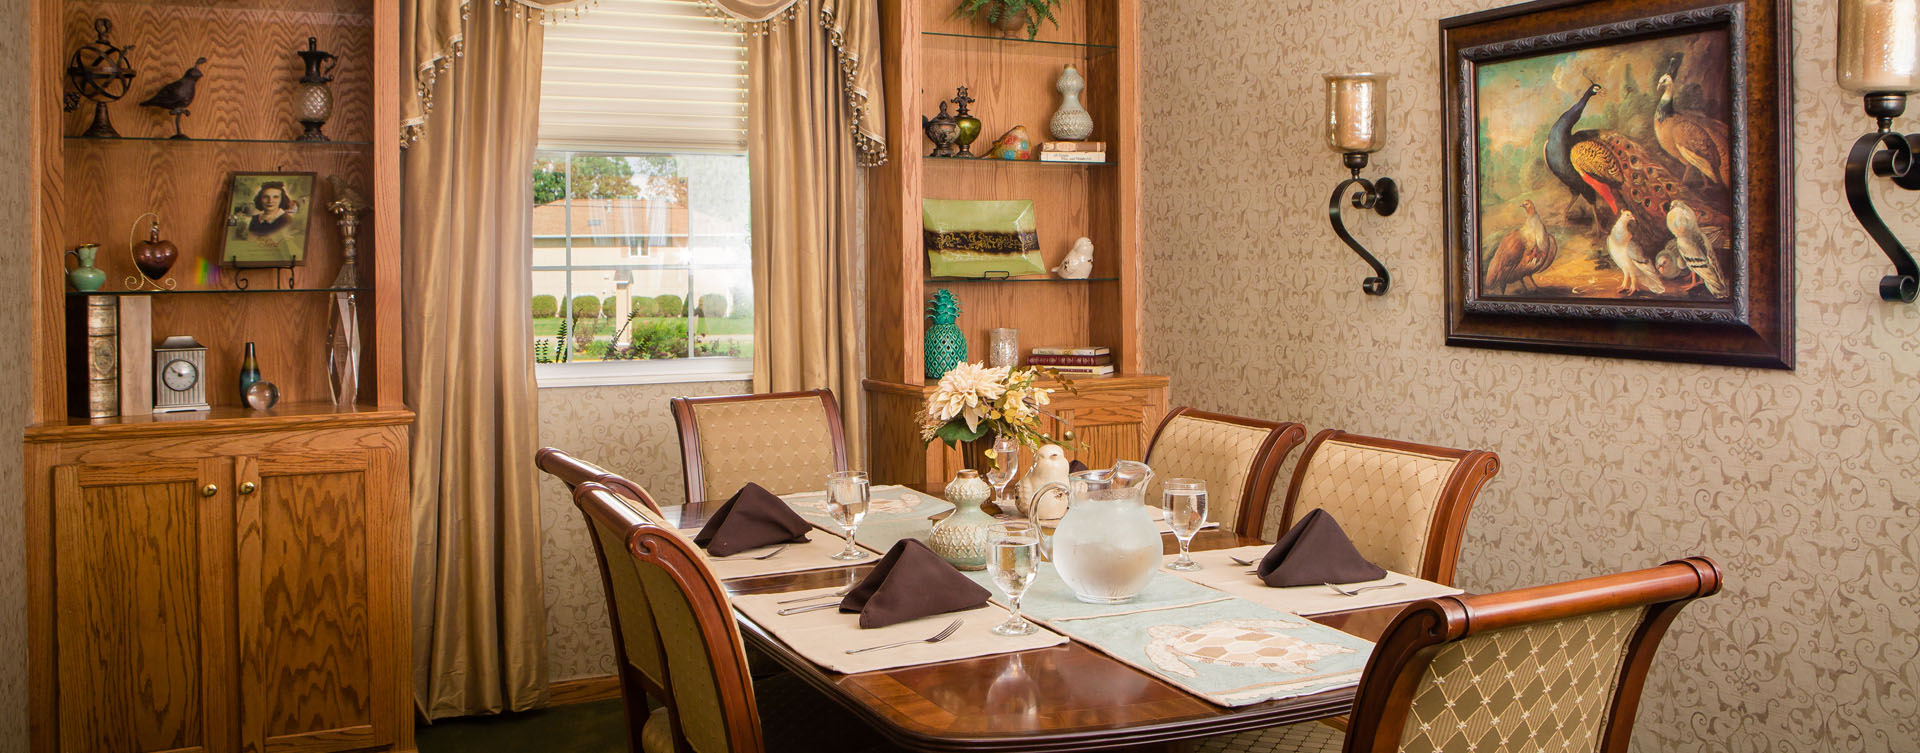 Celebrate special occasions in the private dining room at Bickford of Macomb